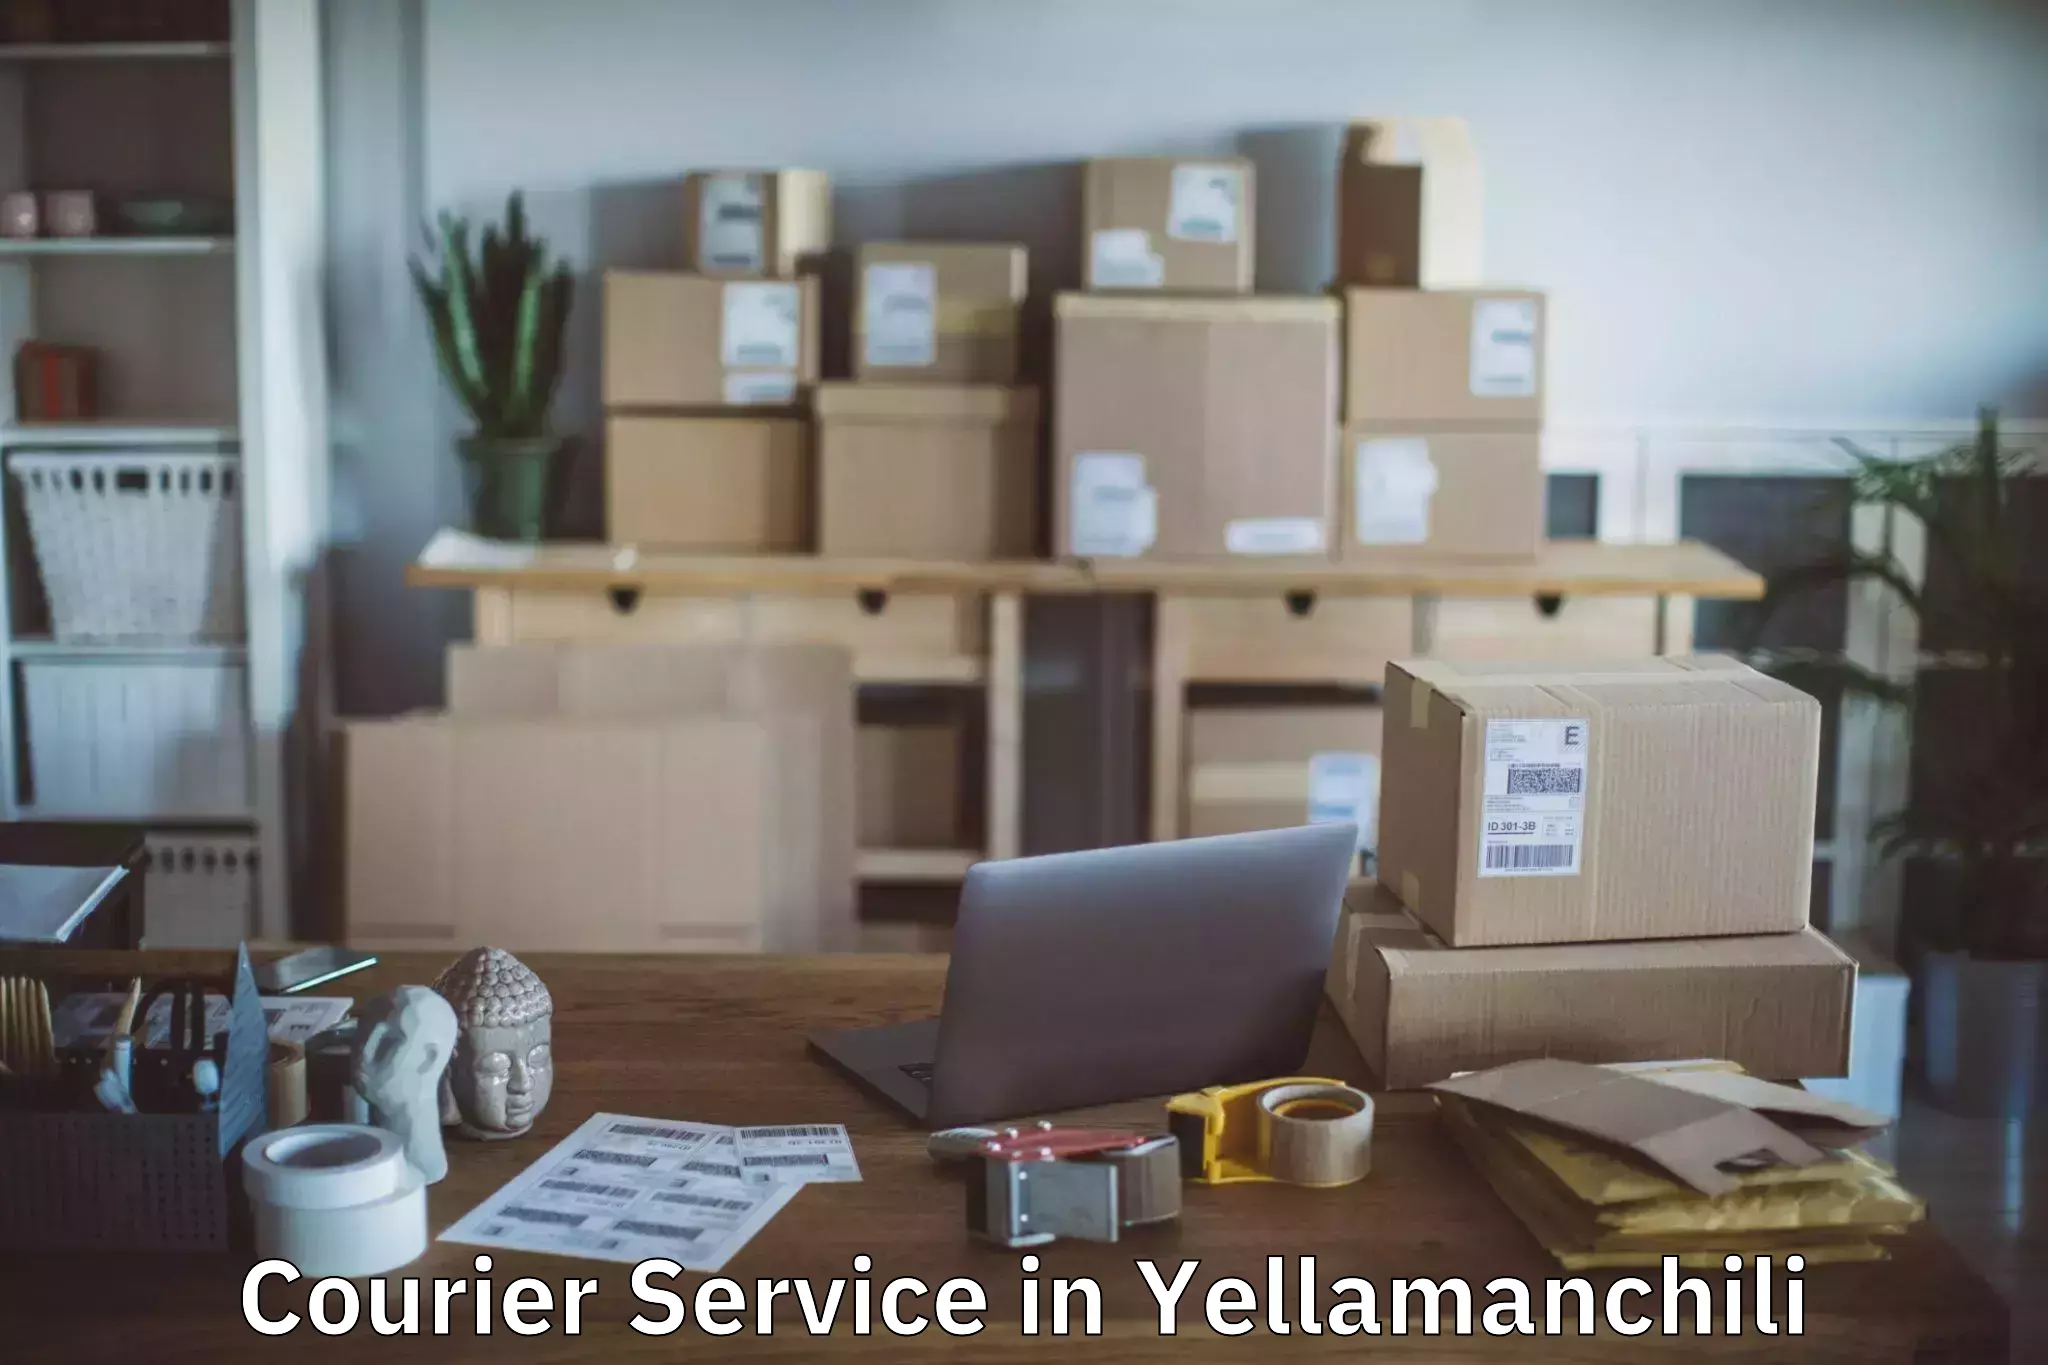 Courier dispatch services in Yellamanchili